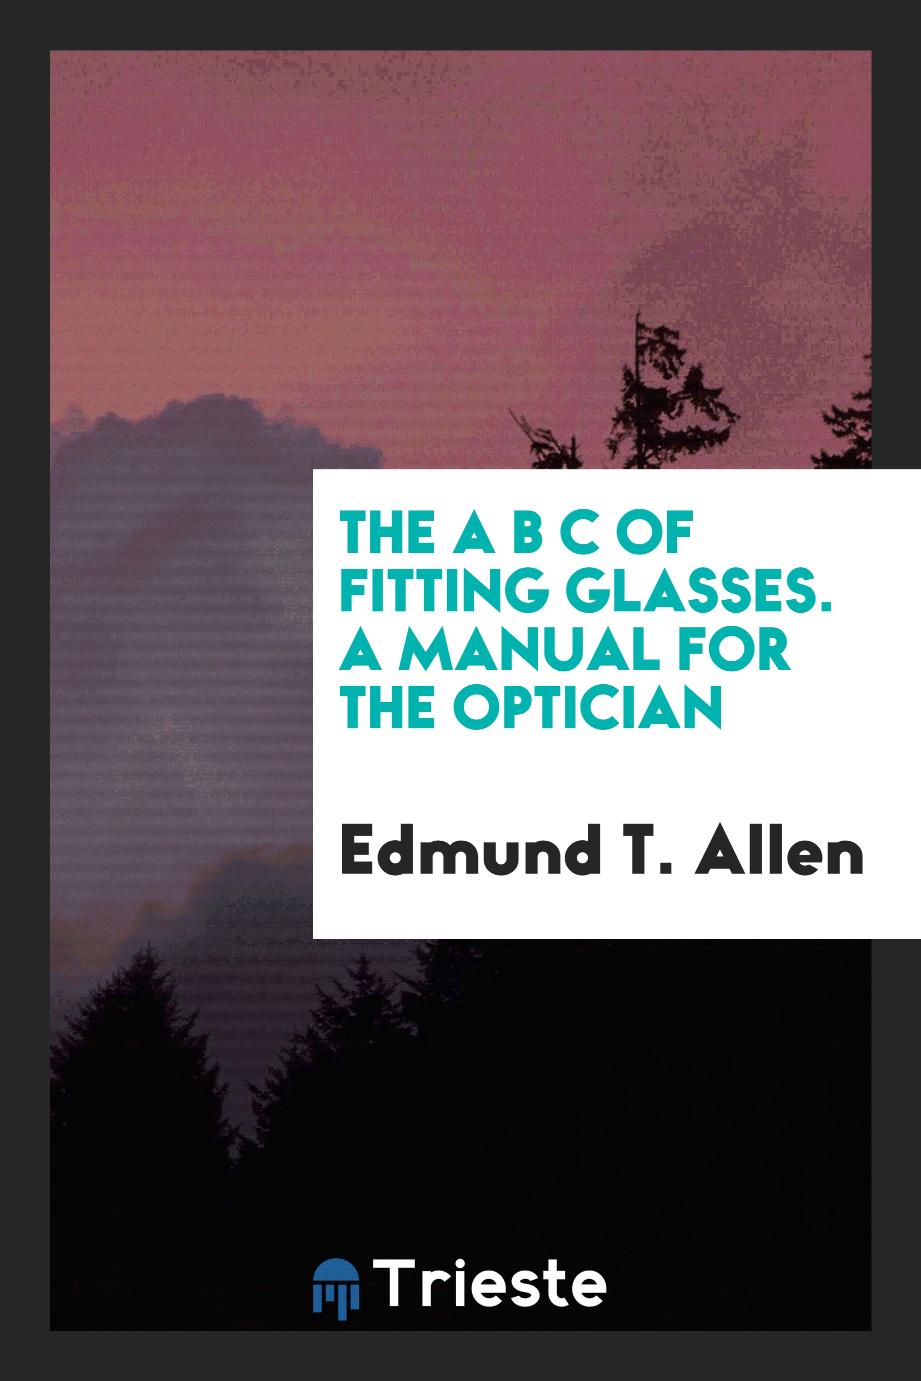 The A B C of Fitting Glasses. A Manual for the Optician